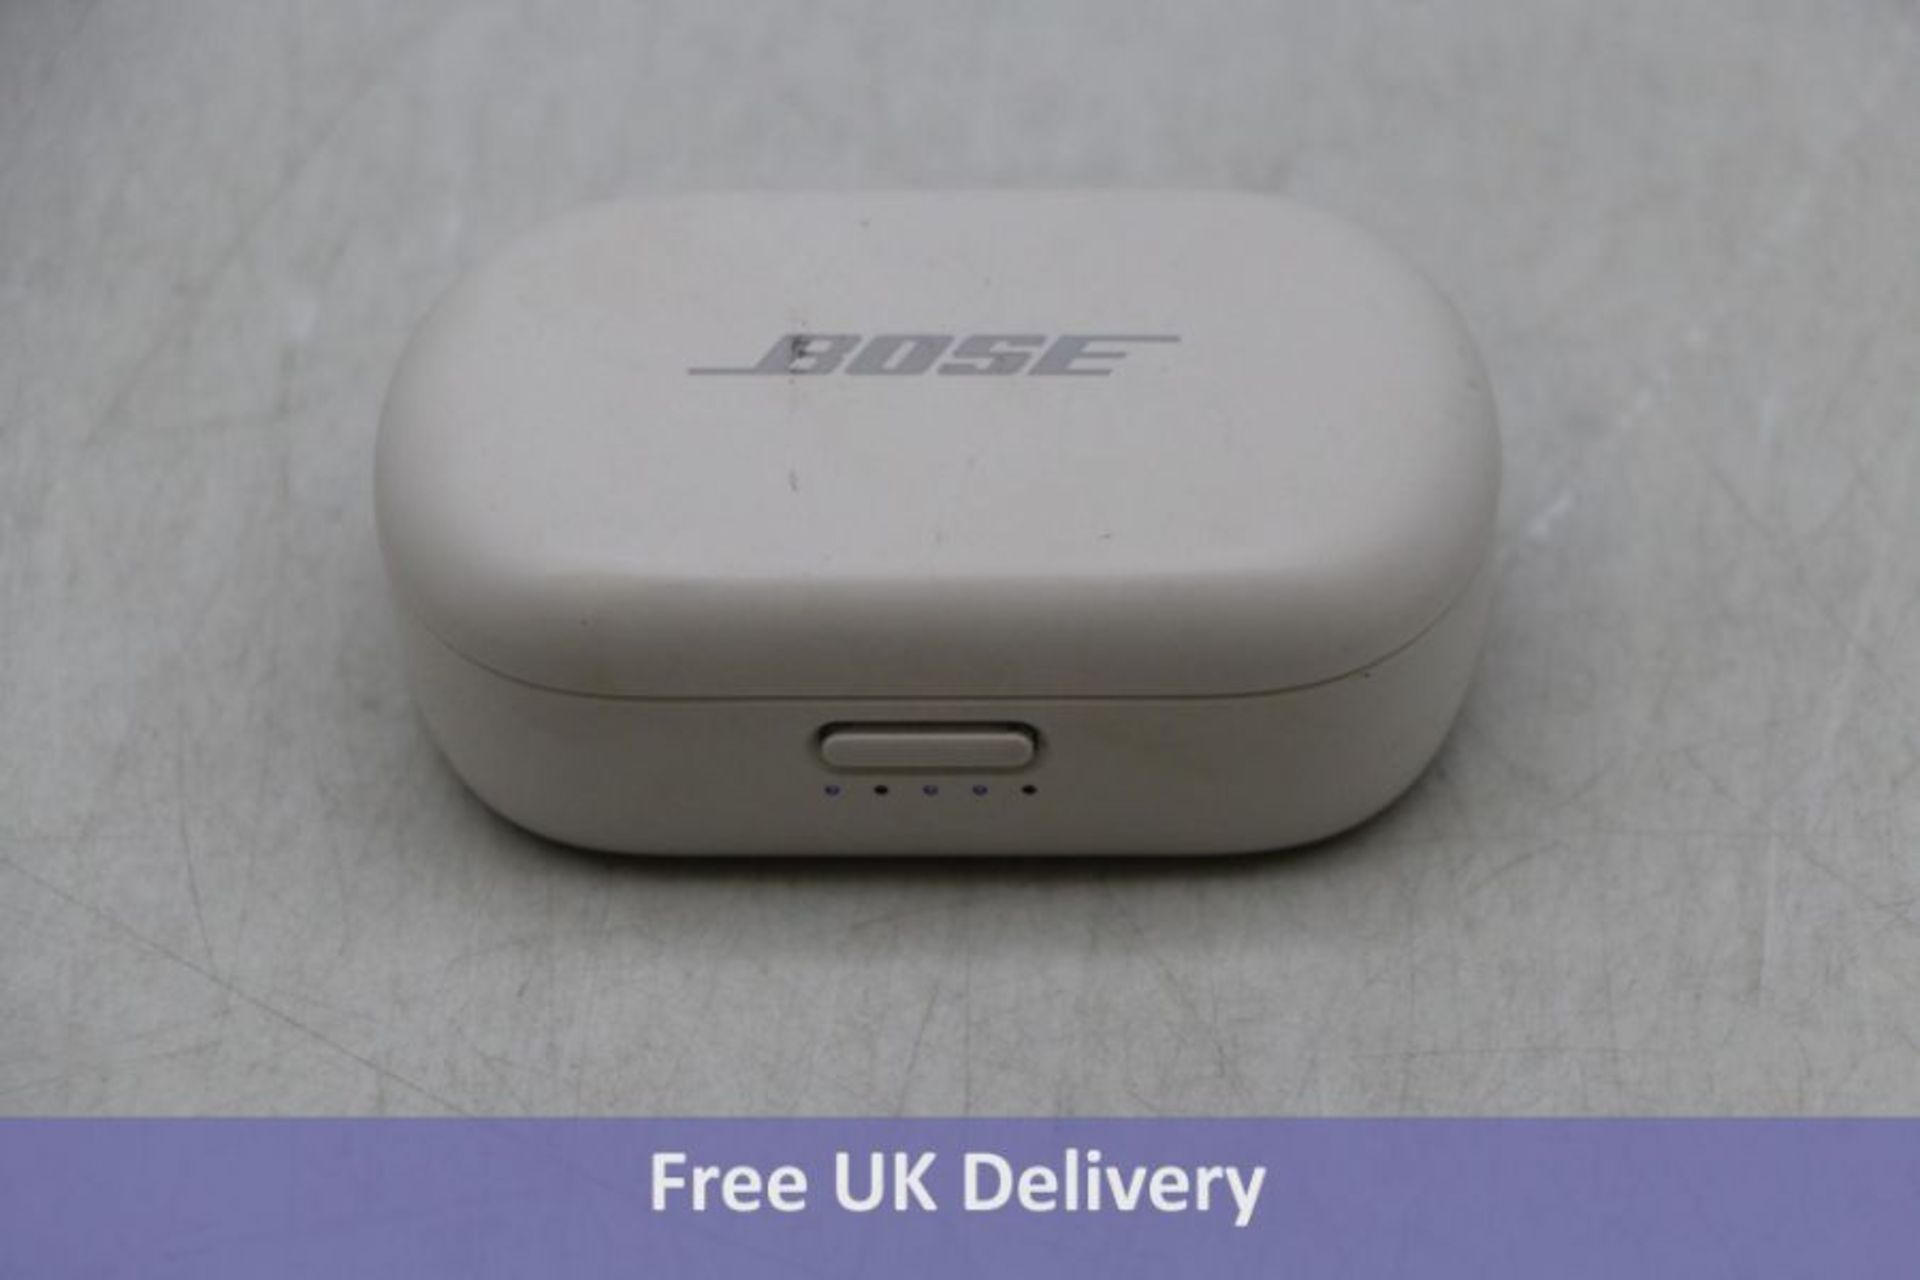 Bose QuietComfort Noise Cancelling Earbuds, White. Used